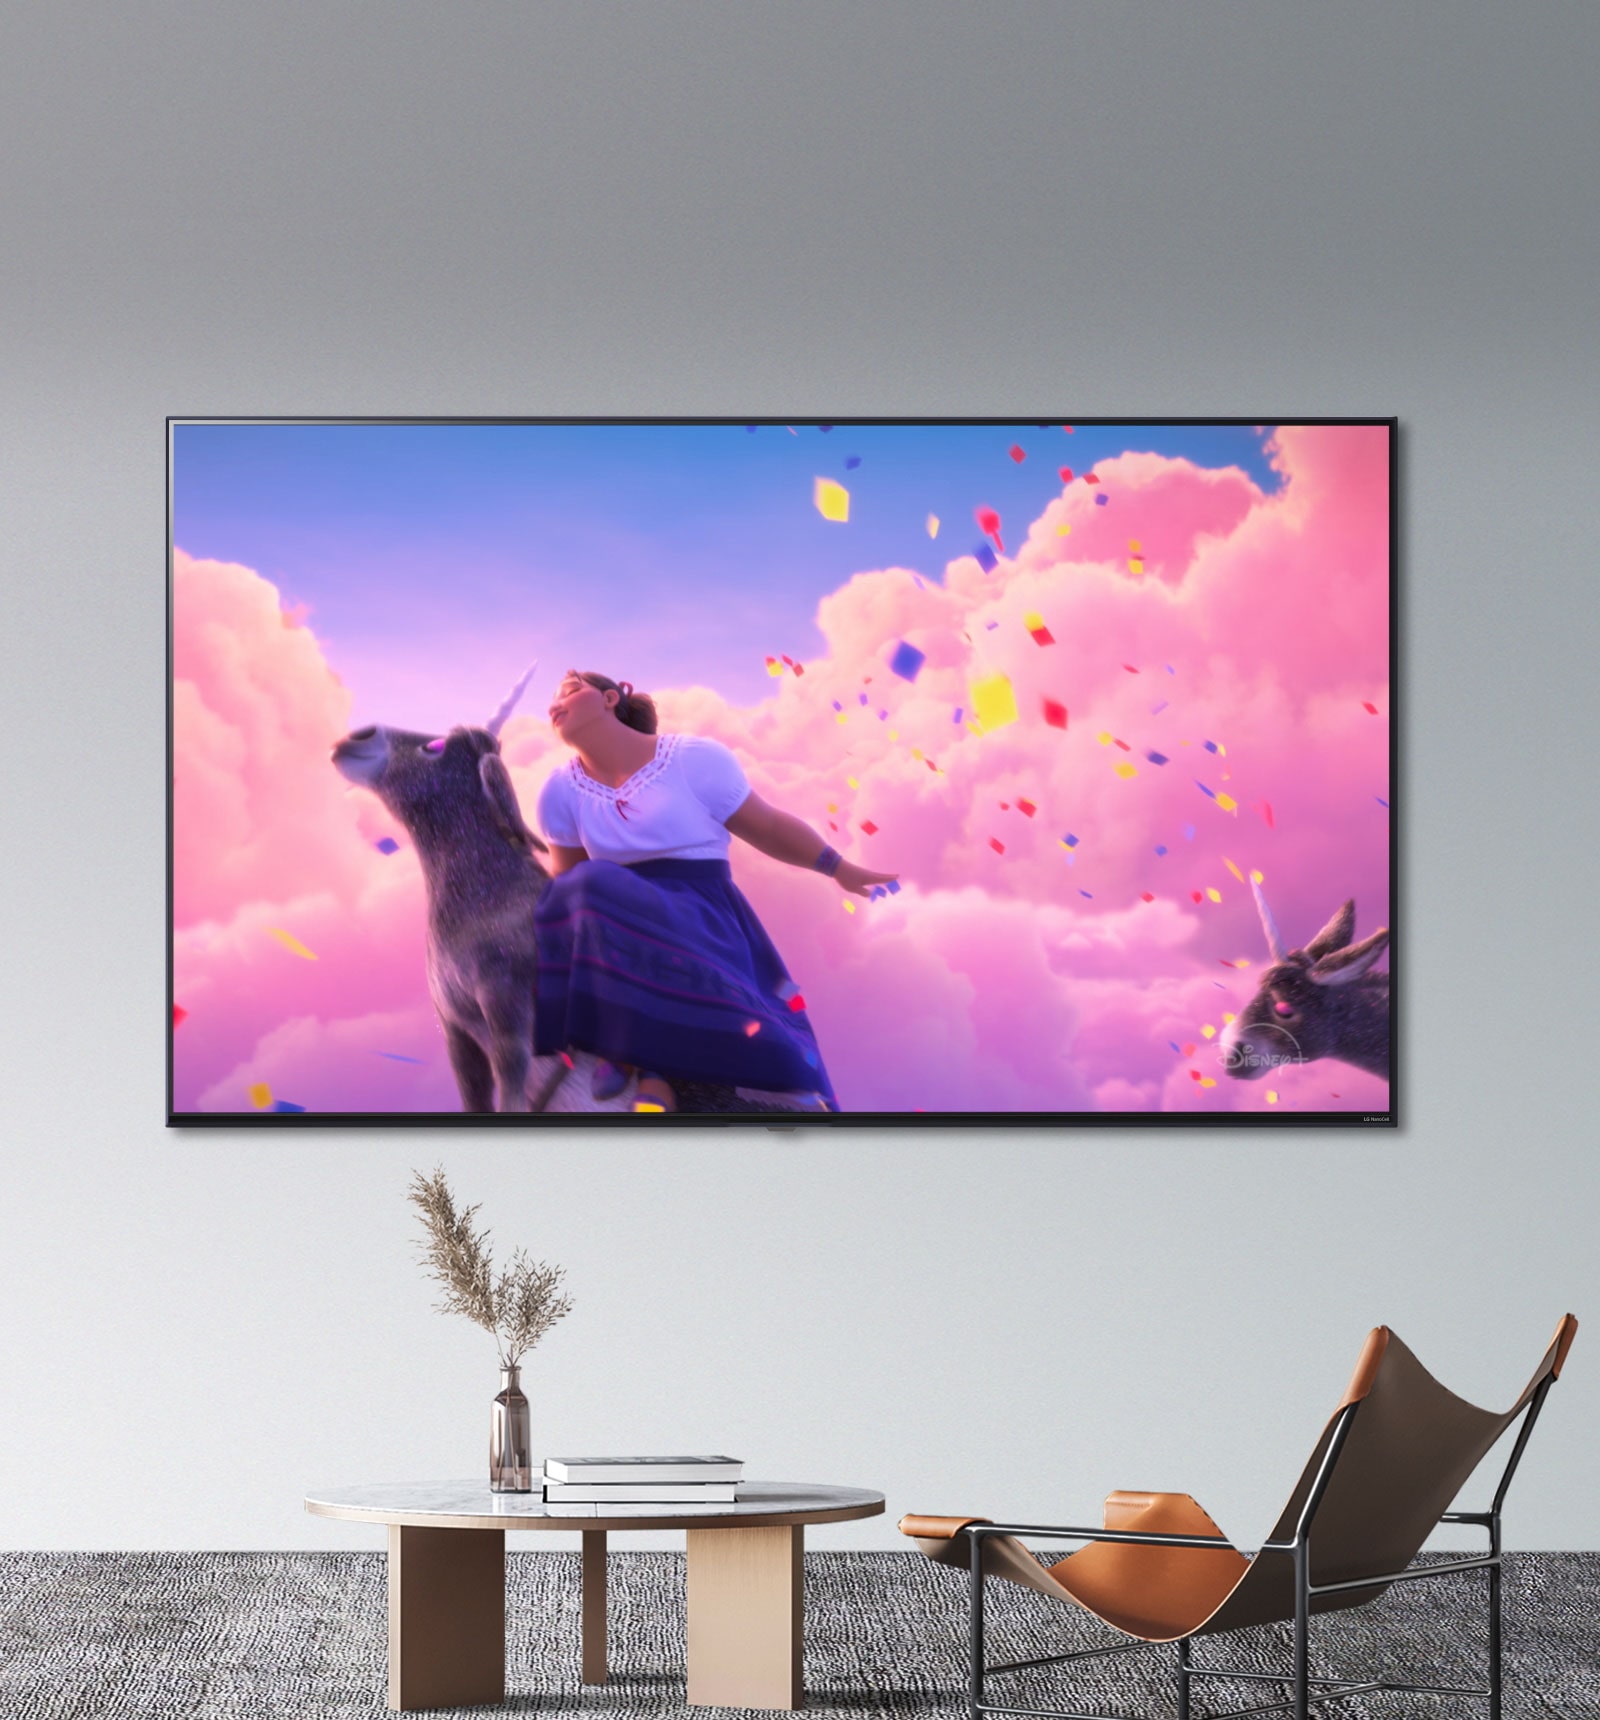 Scenes from Disney's animated film "Encanto" showcase bright, vivid colors on an LG NanoCell TV.